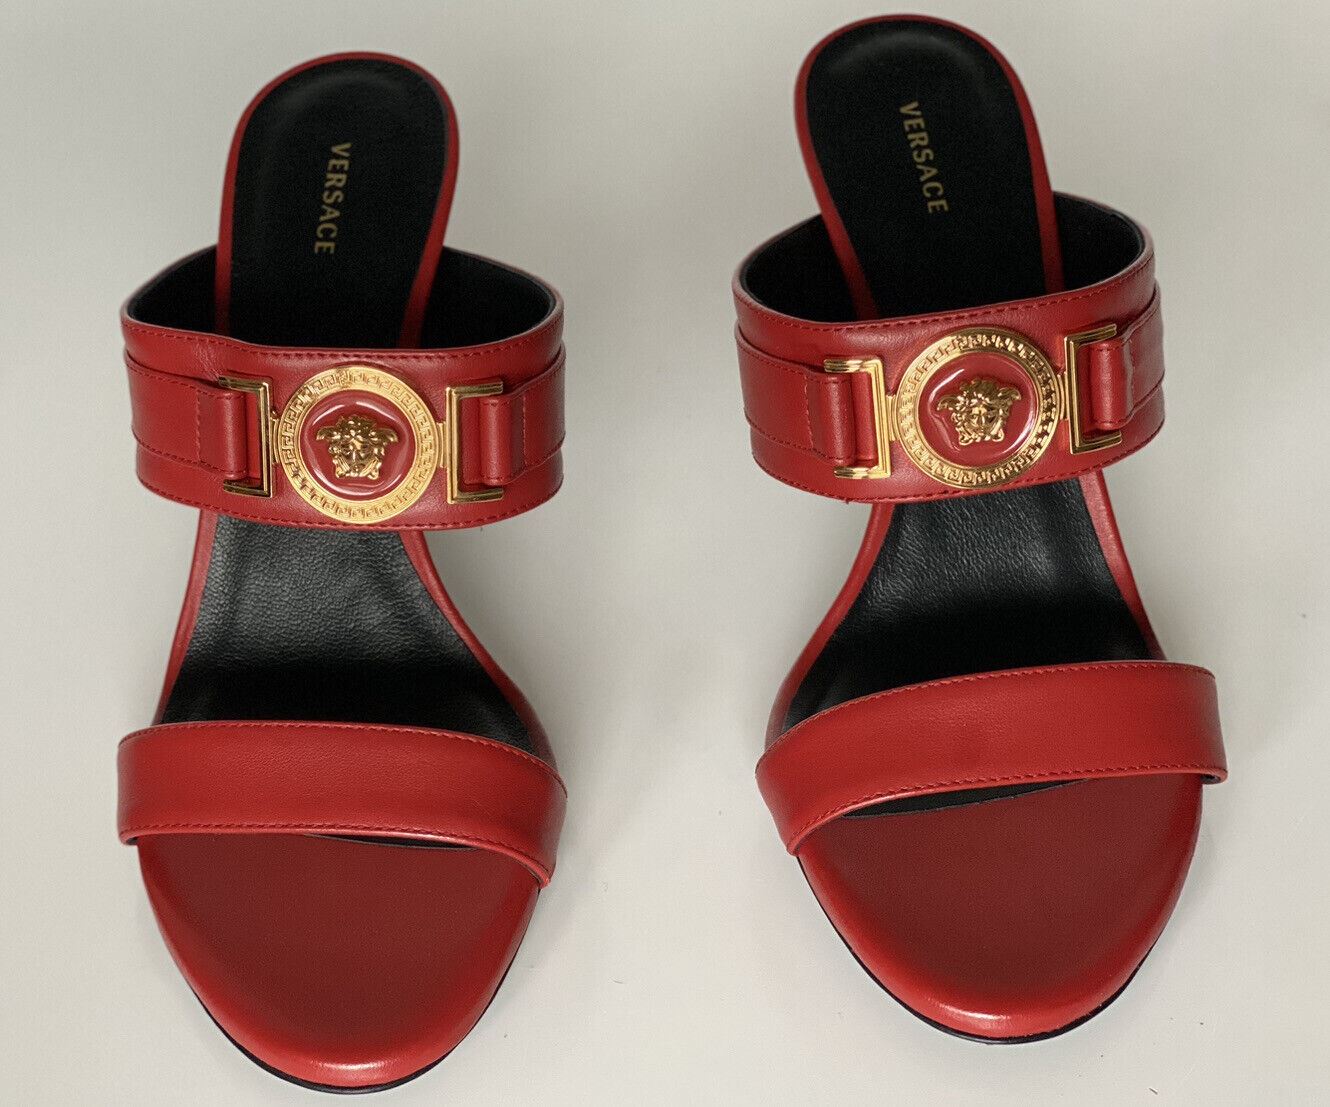 NIB VERSACE Medusa Women's Red Pumps Sandals 7 US (37 Euro)  Made in Italy D1NPS